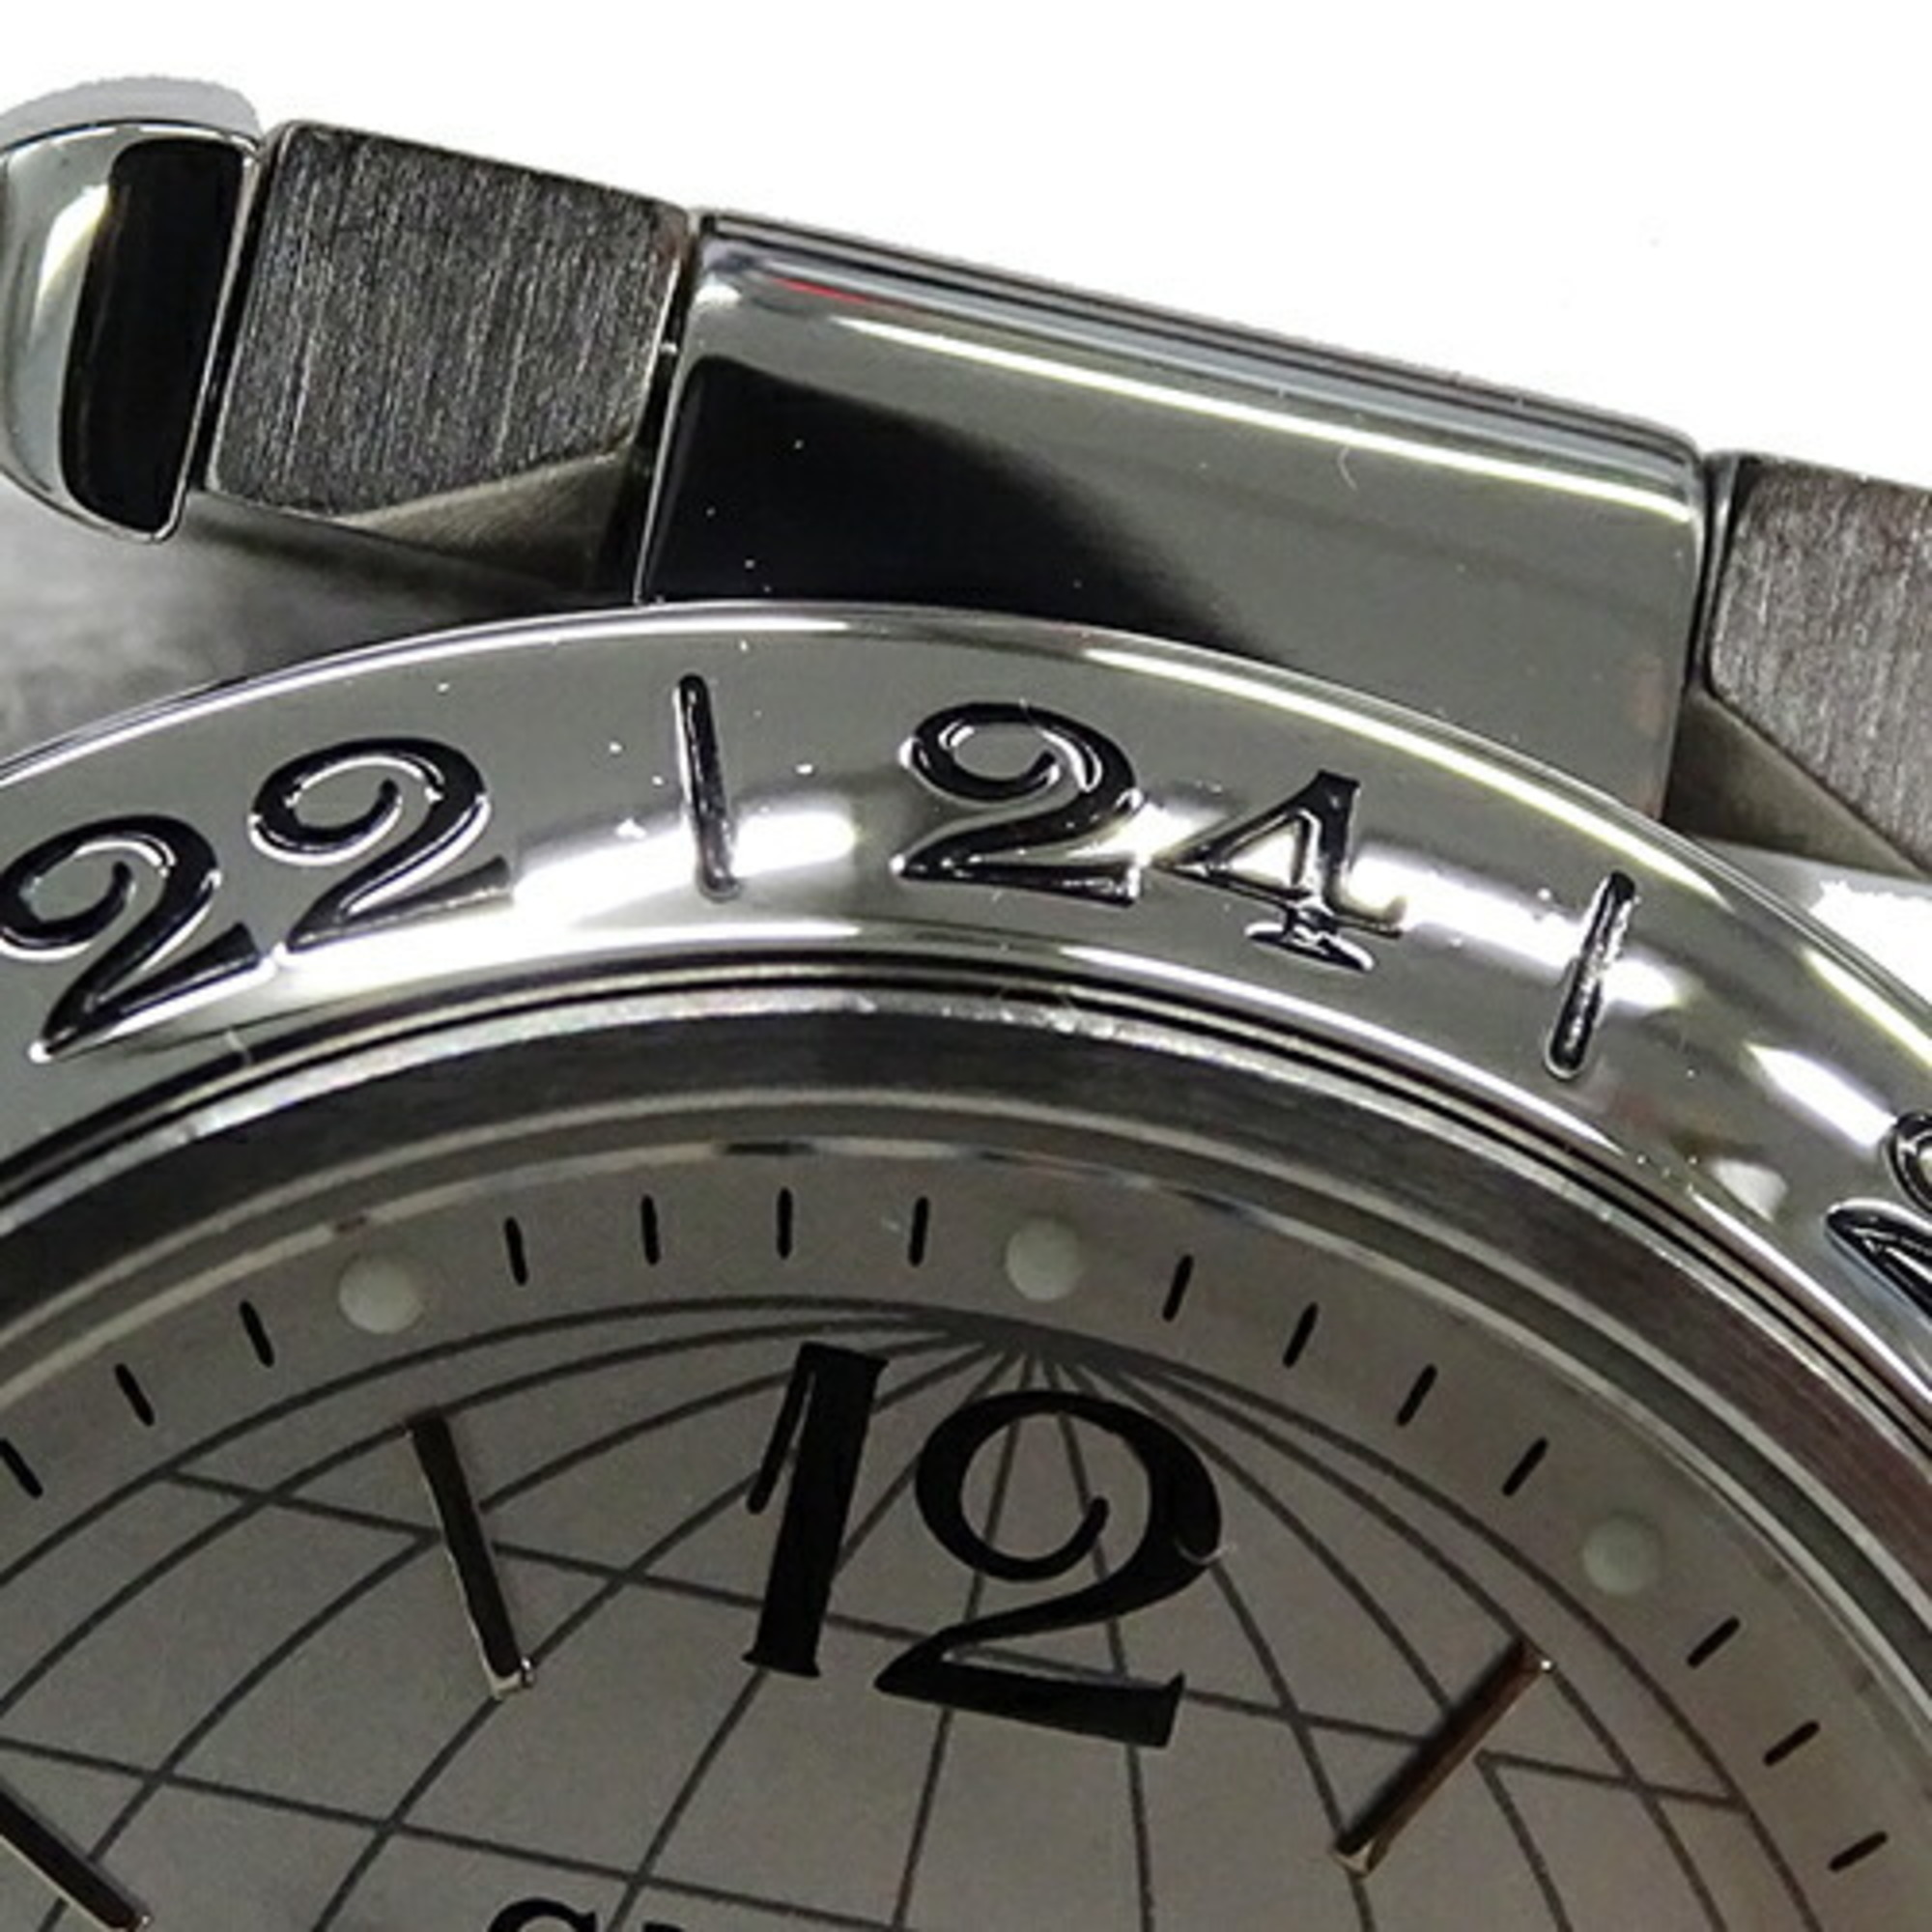 Cartier Wristwatch for Boys Pasha C Meridian Date Automatic AT Stainless Steel SS W31078M7 Silver Polished